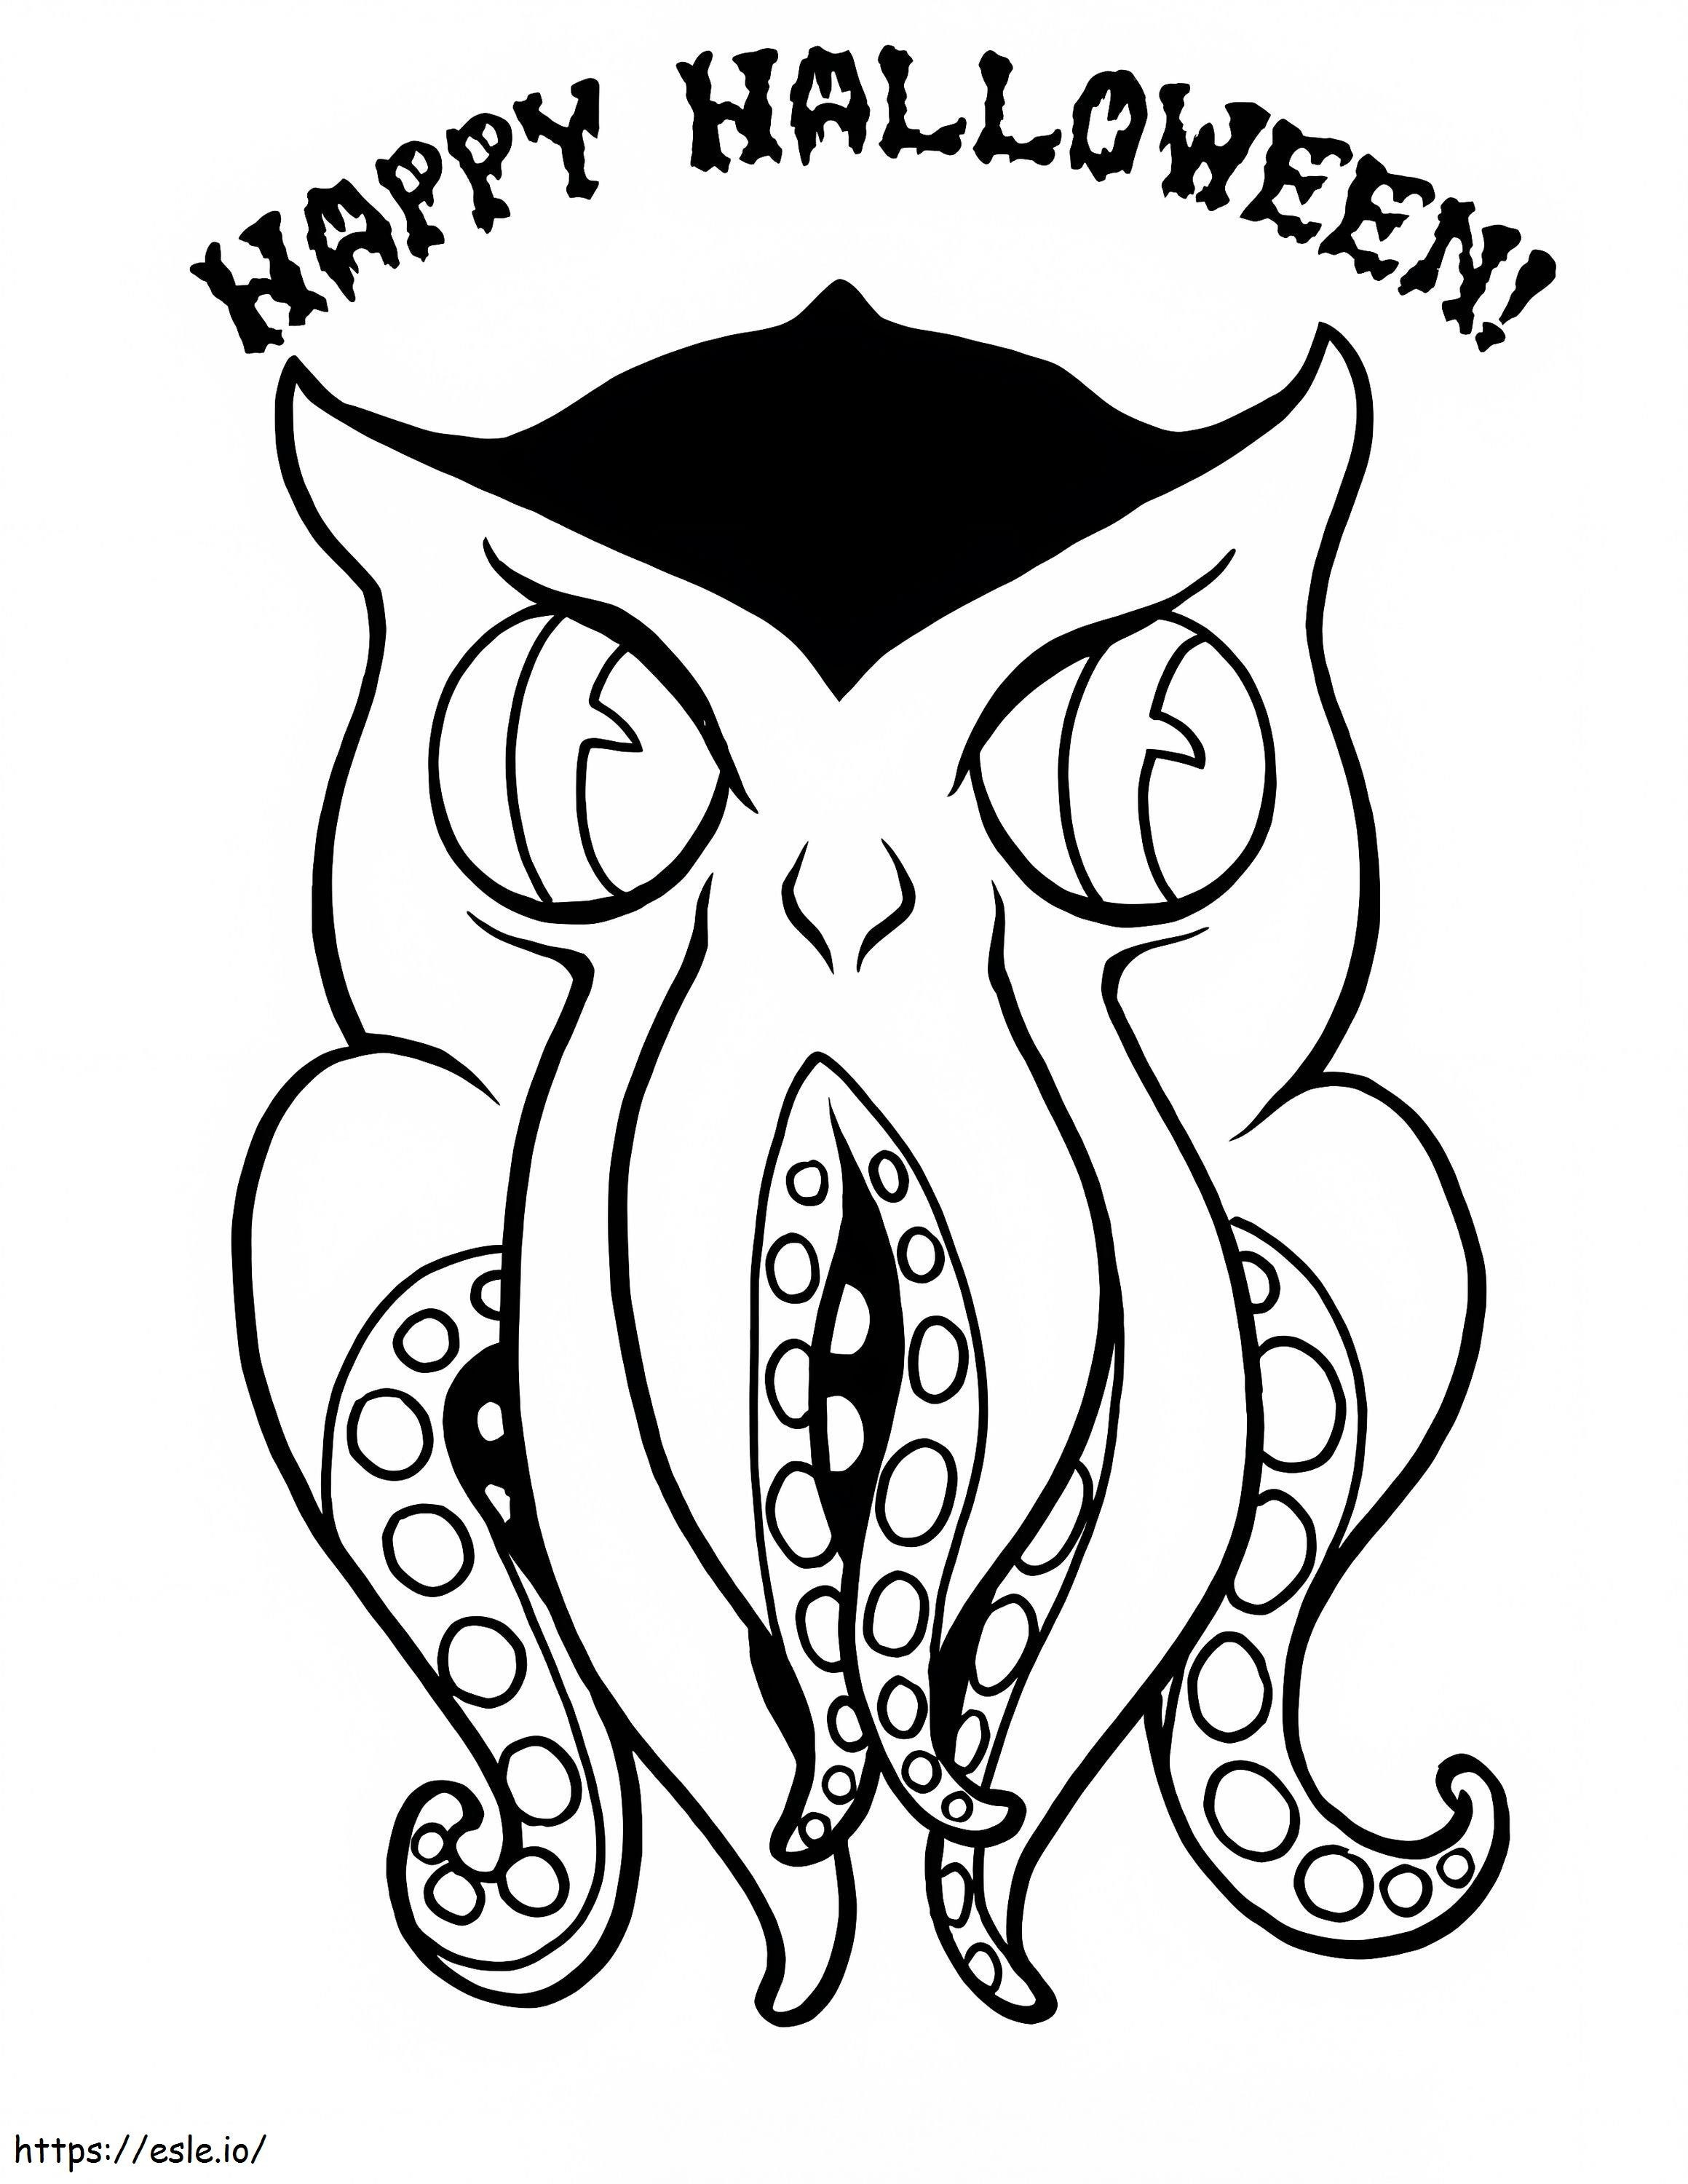 Happy Halloween Cthulhu coloring page